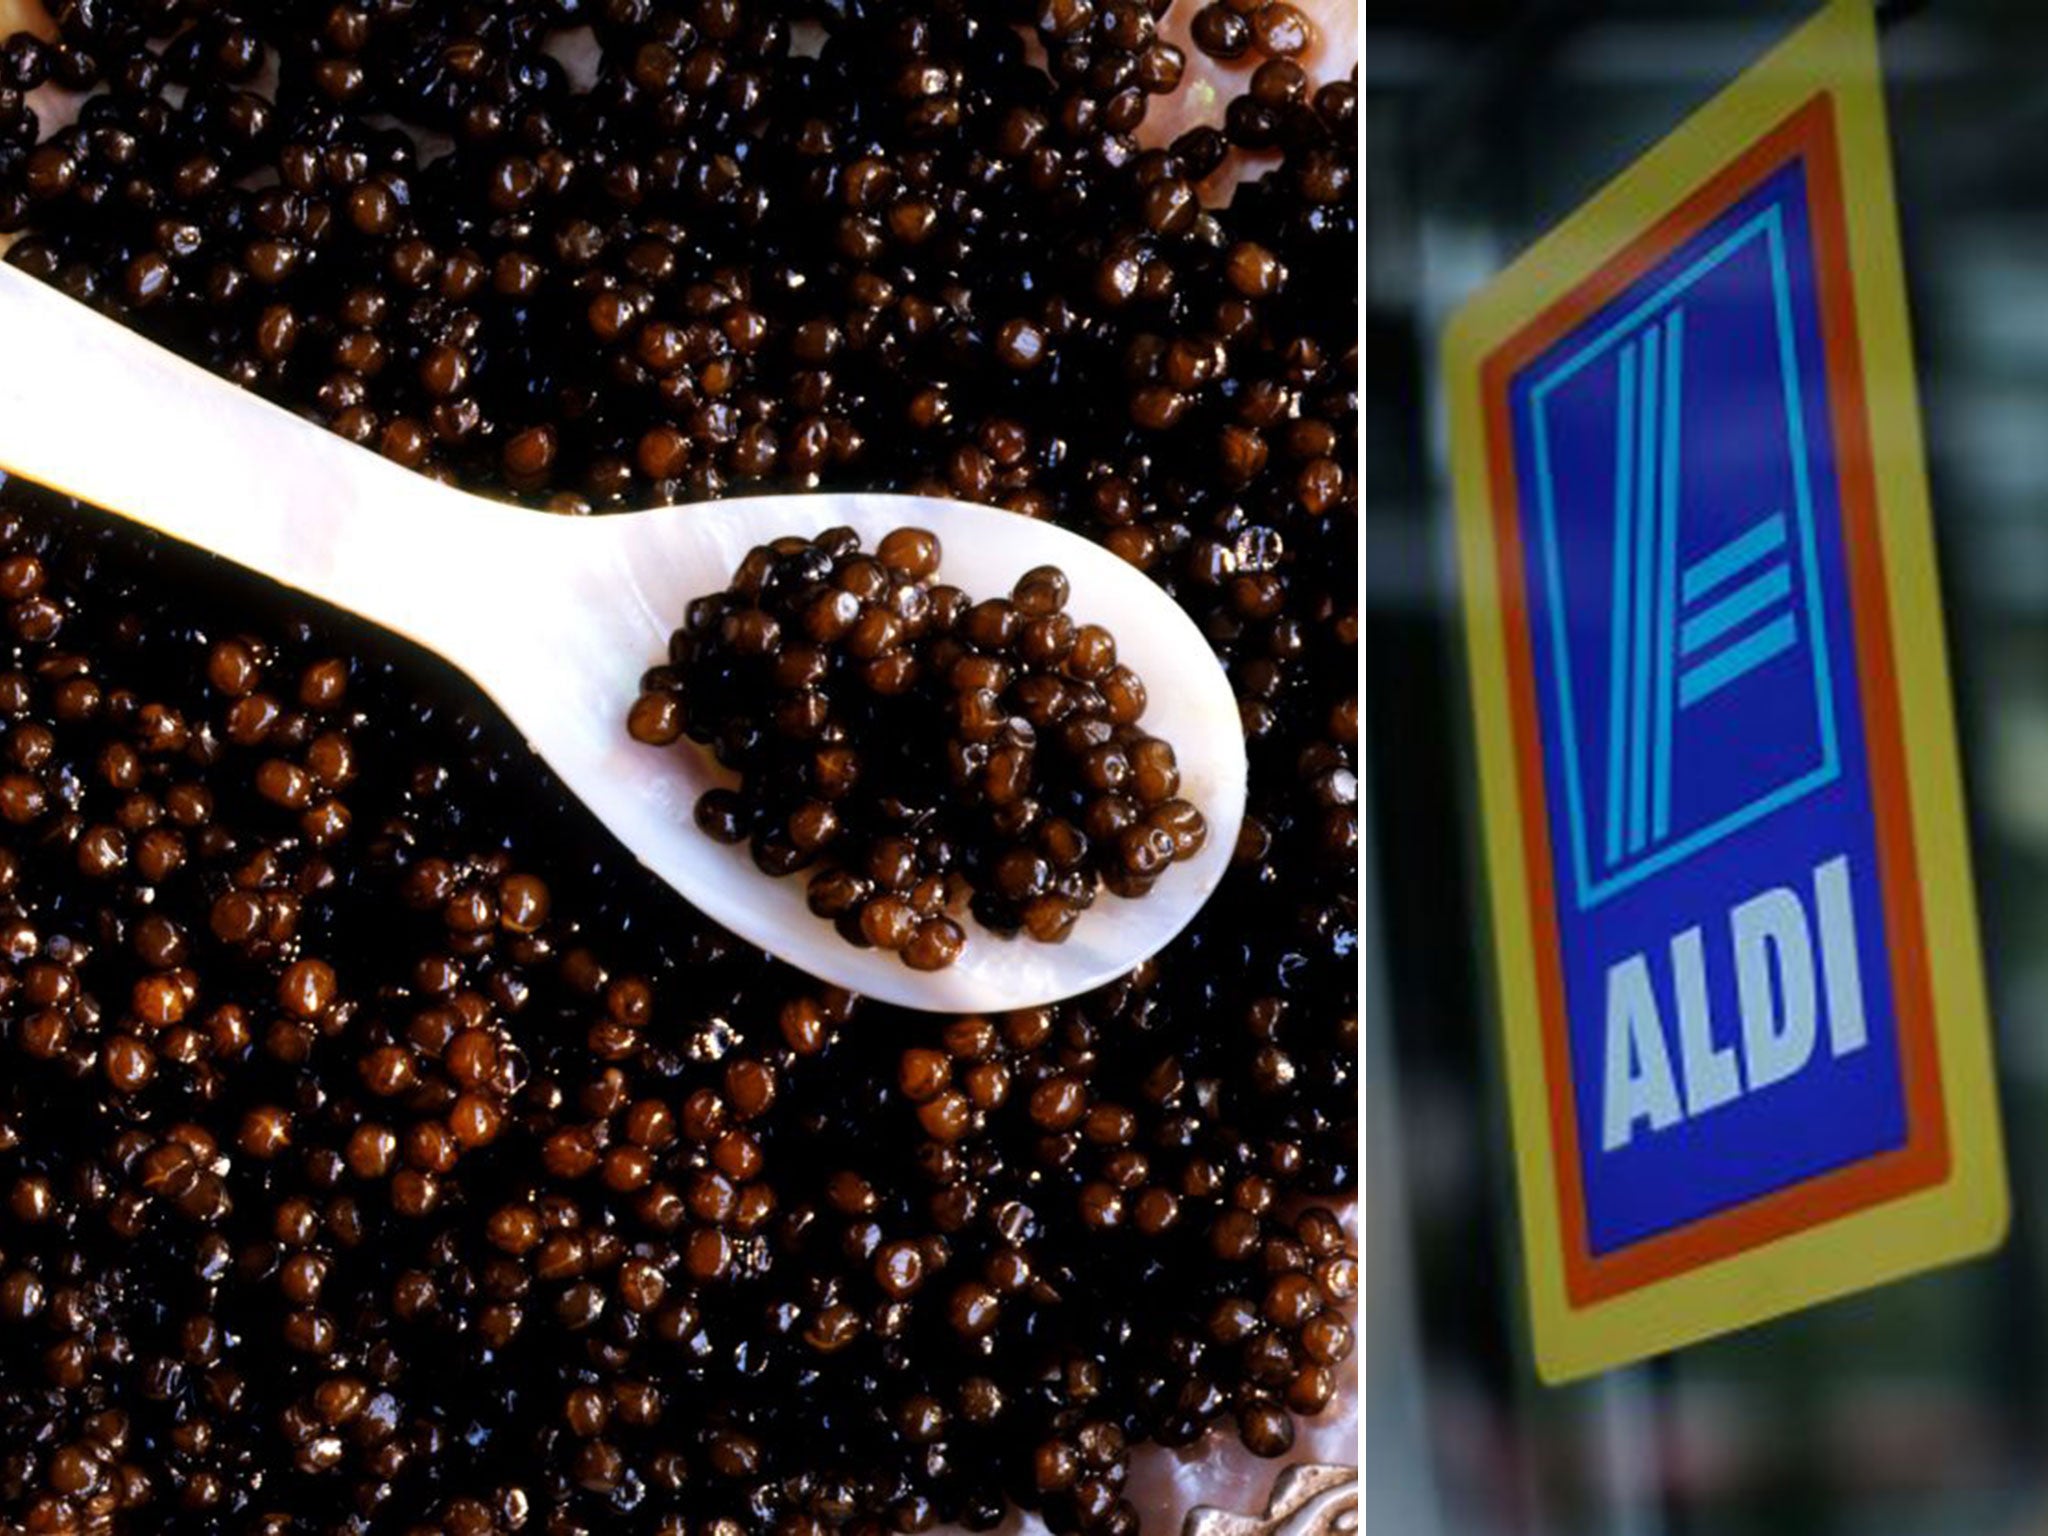 Aldi has now removed all mention of "beluga" from its labels and will call the product "specially selected caviar"